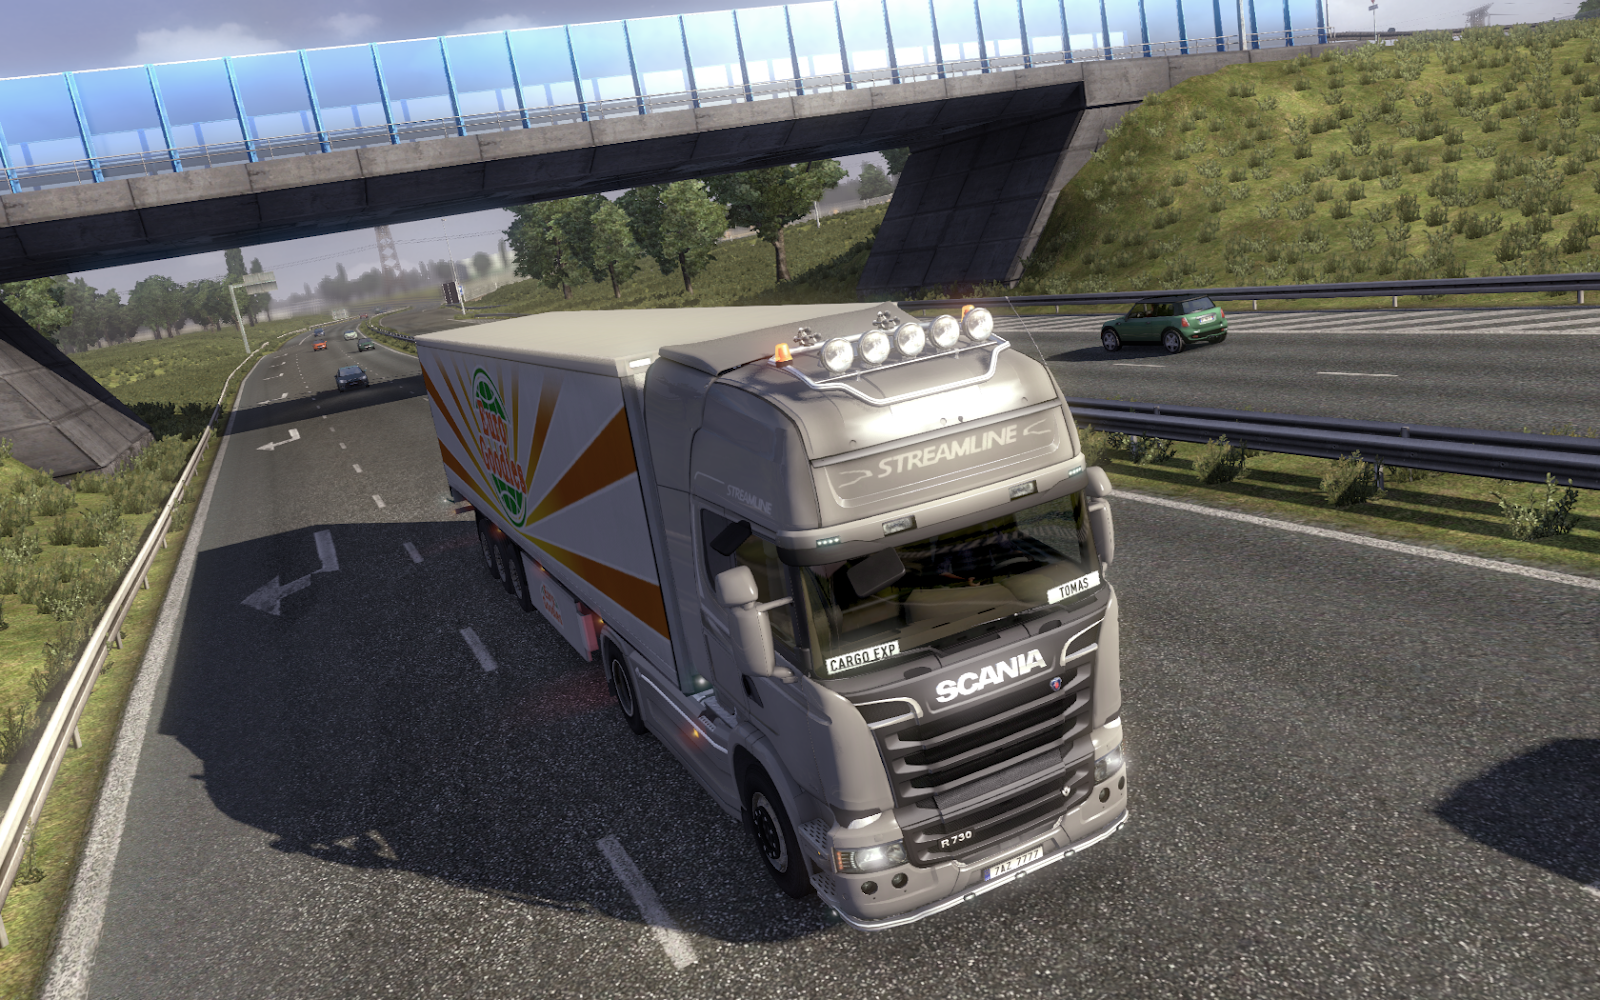 ets2_00056.png